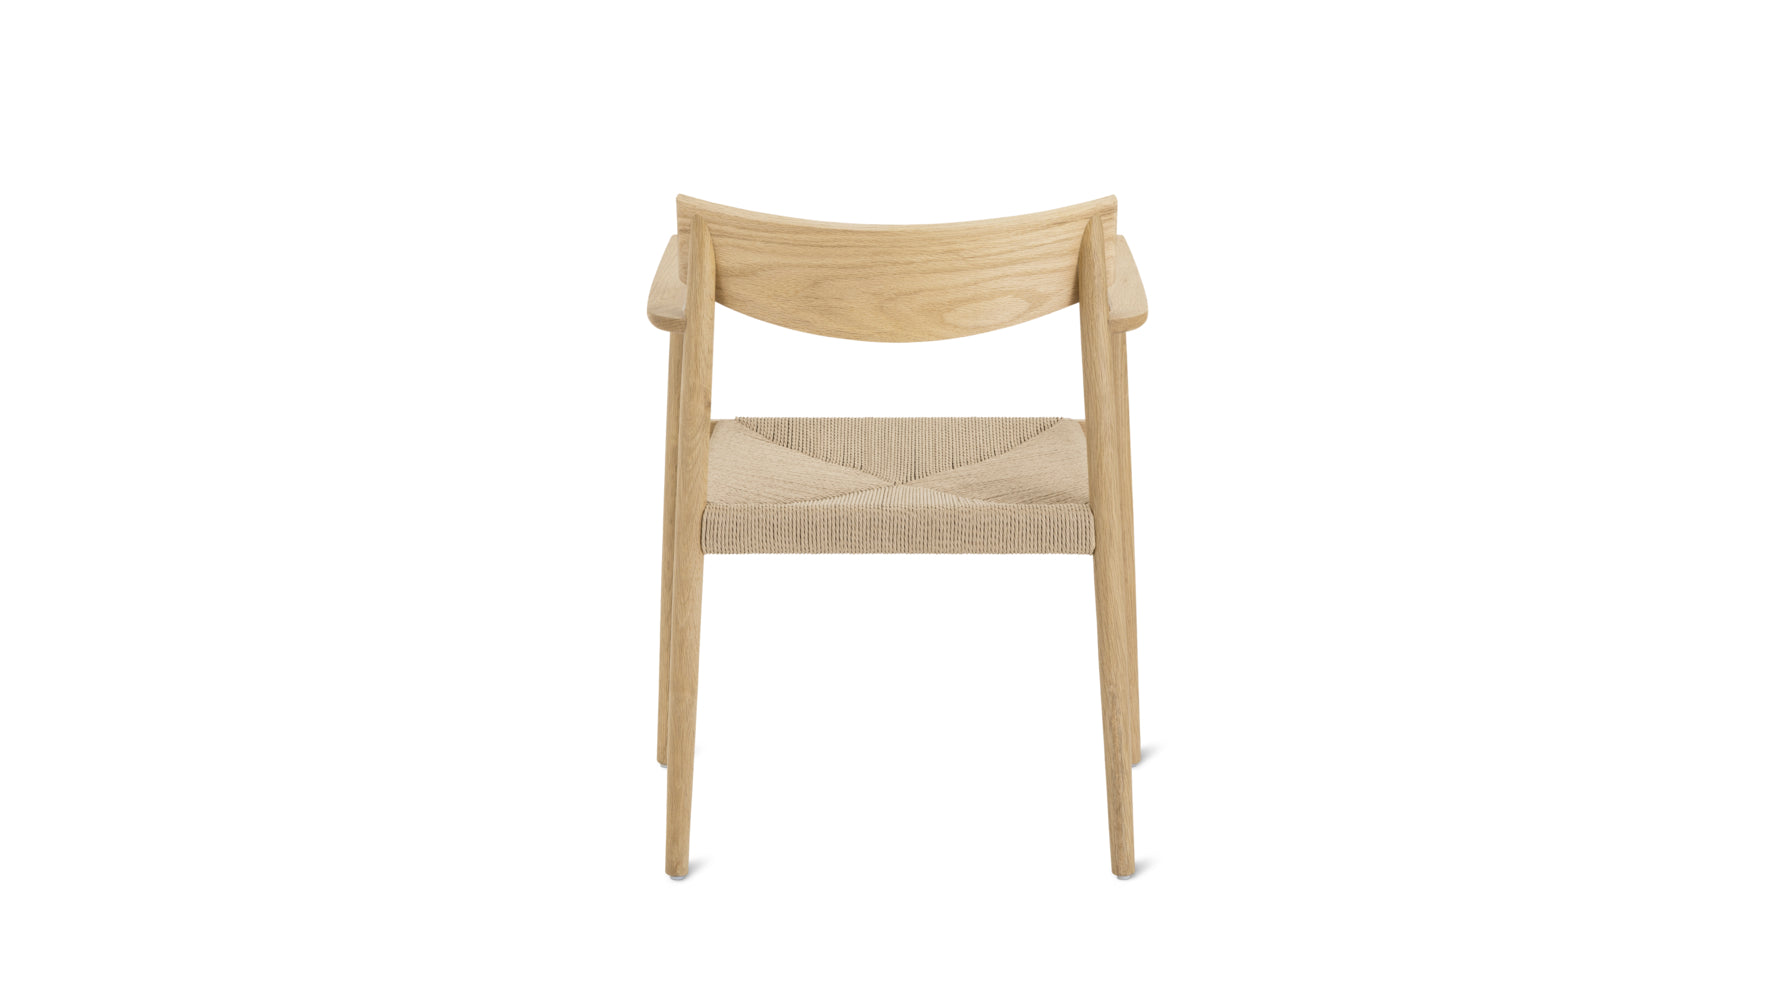 Dinner Guest Dining Chair, White Oak/ Natural Papercord Seat - Image 6